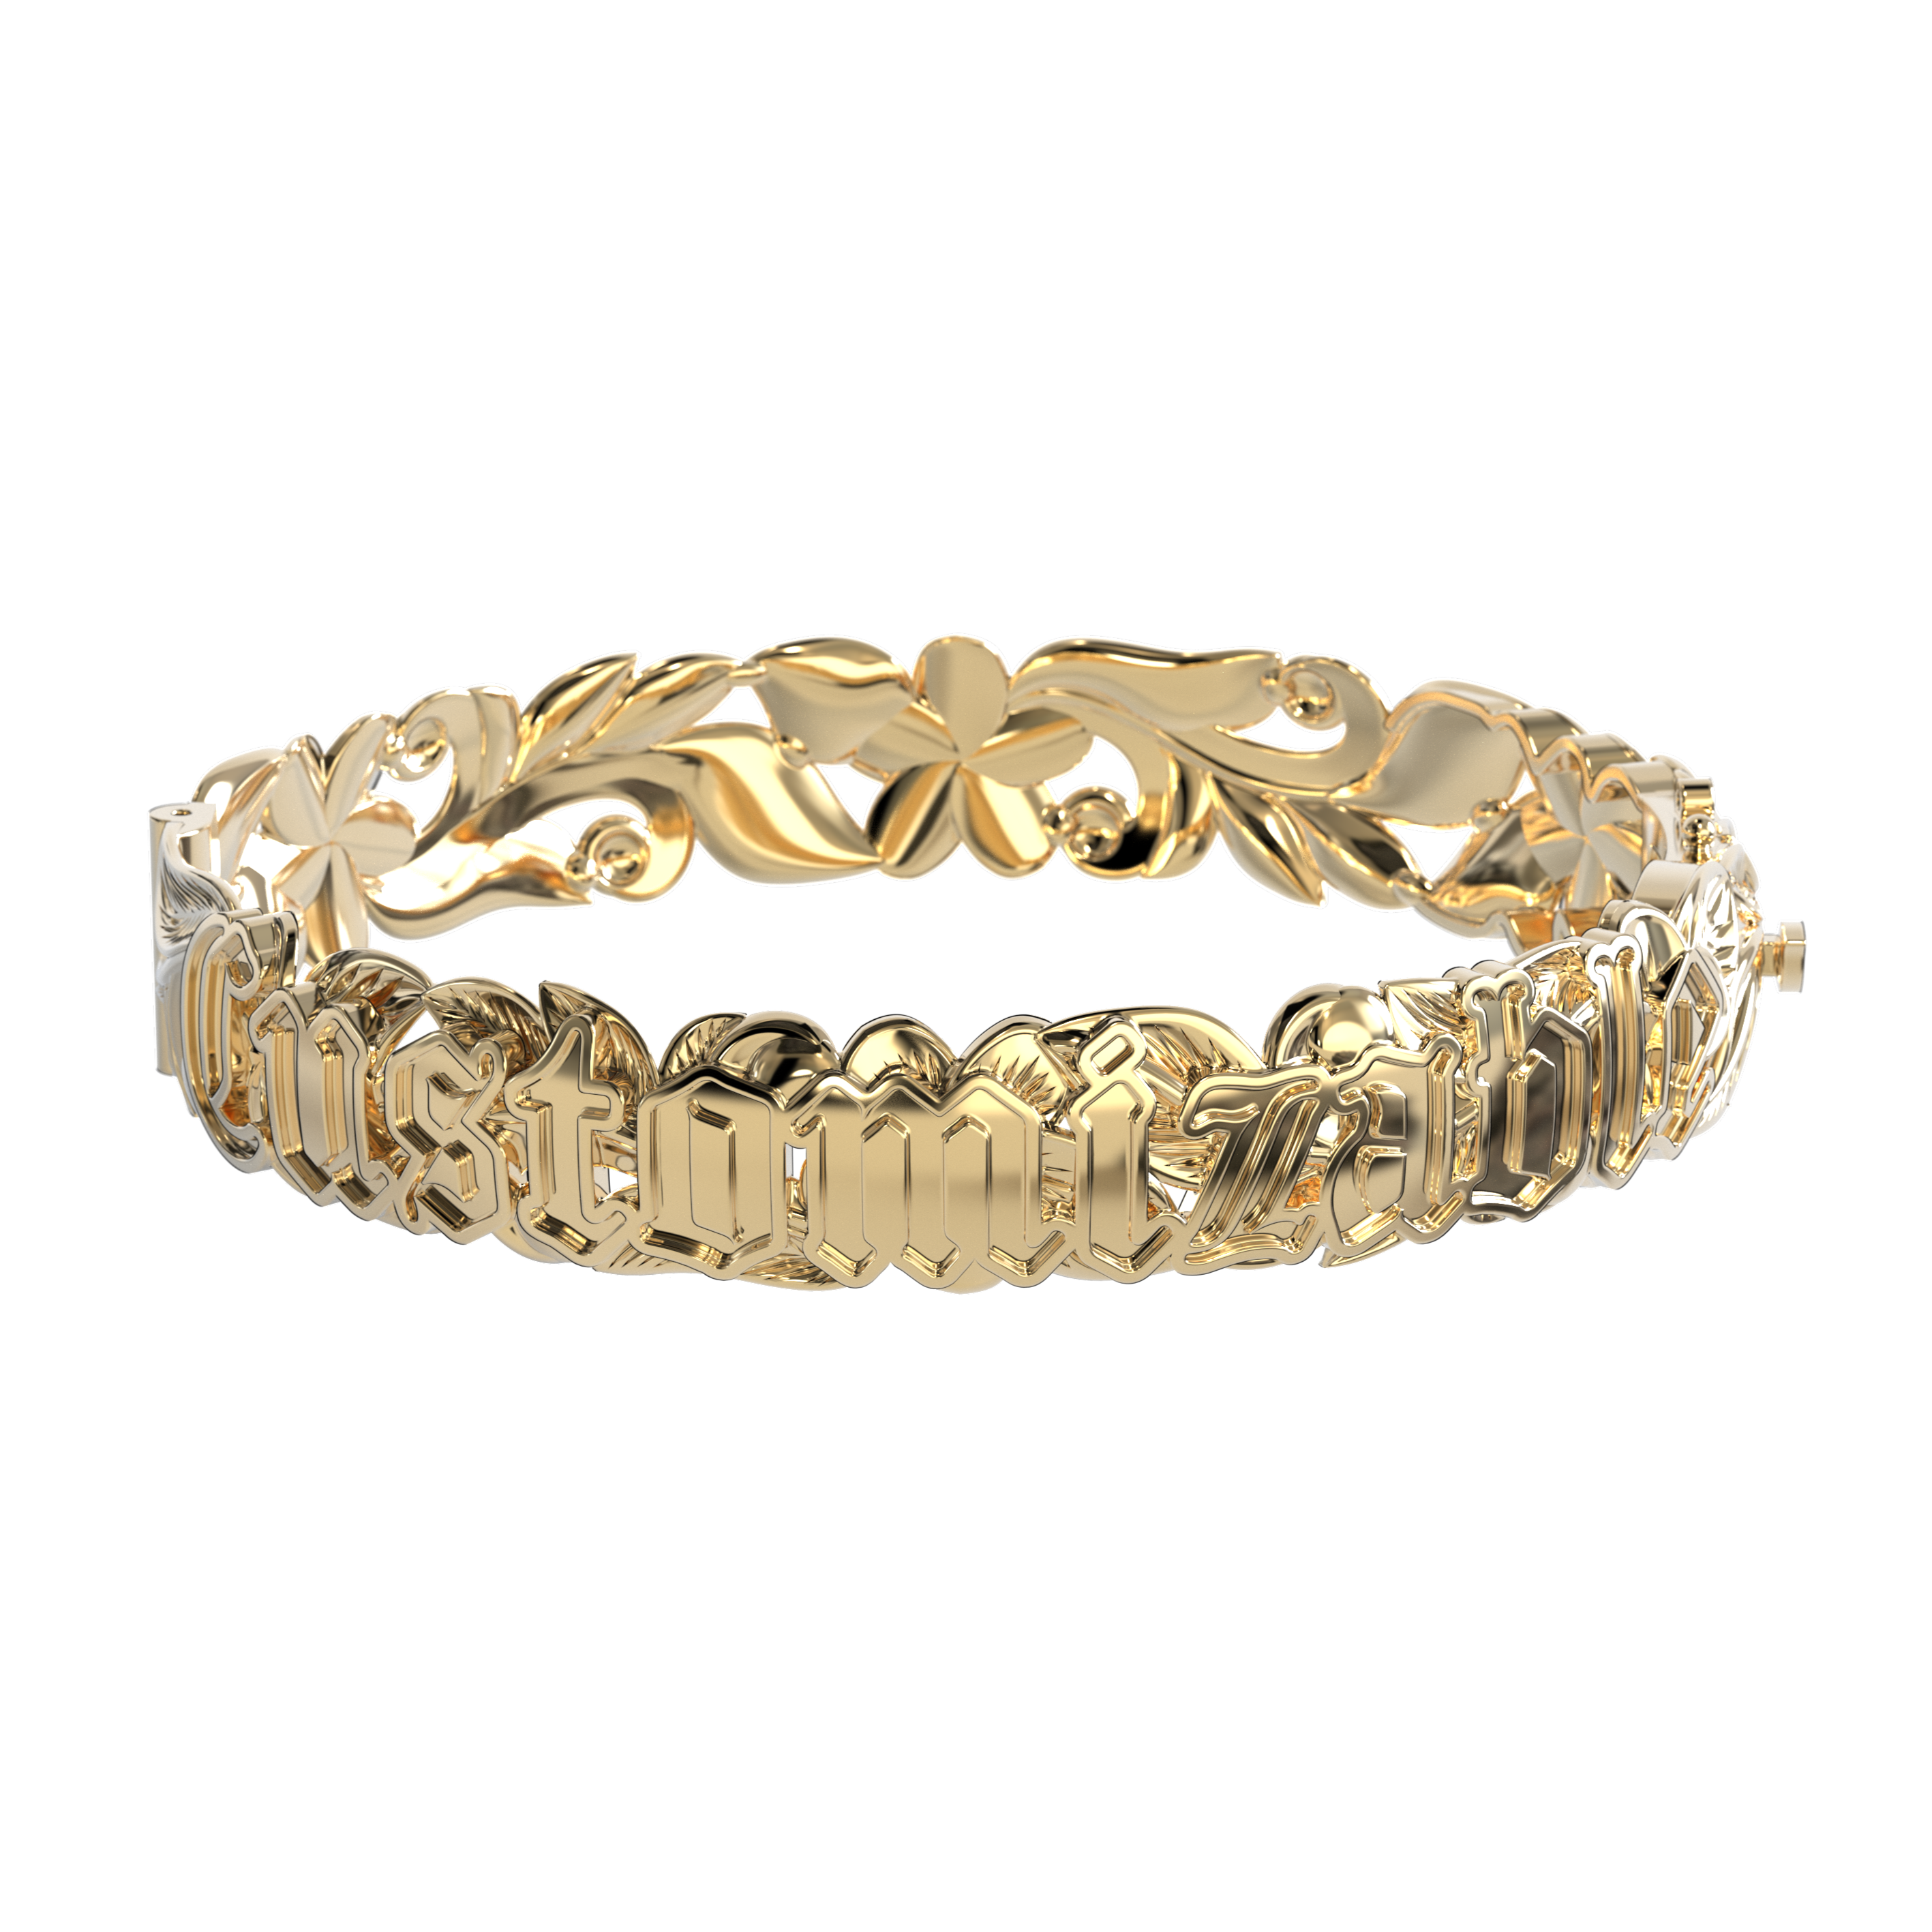 12mm Customizable Hawaiian Hinge Bracelet with Raised Letters in Gold